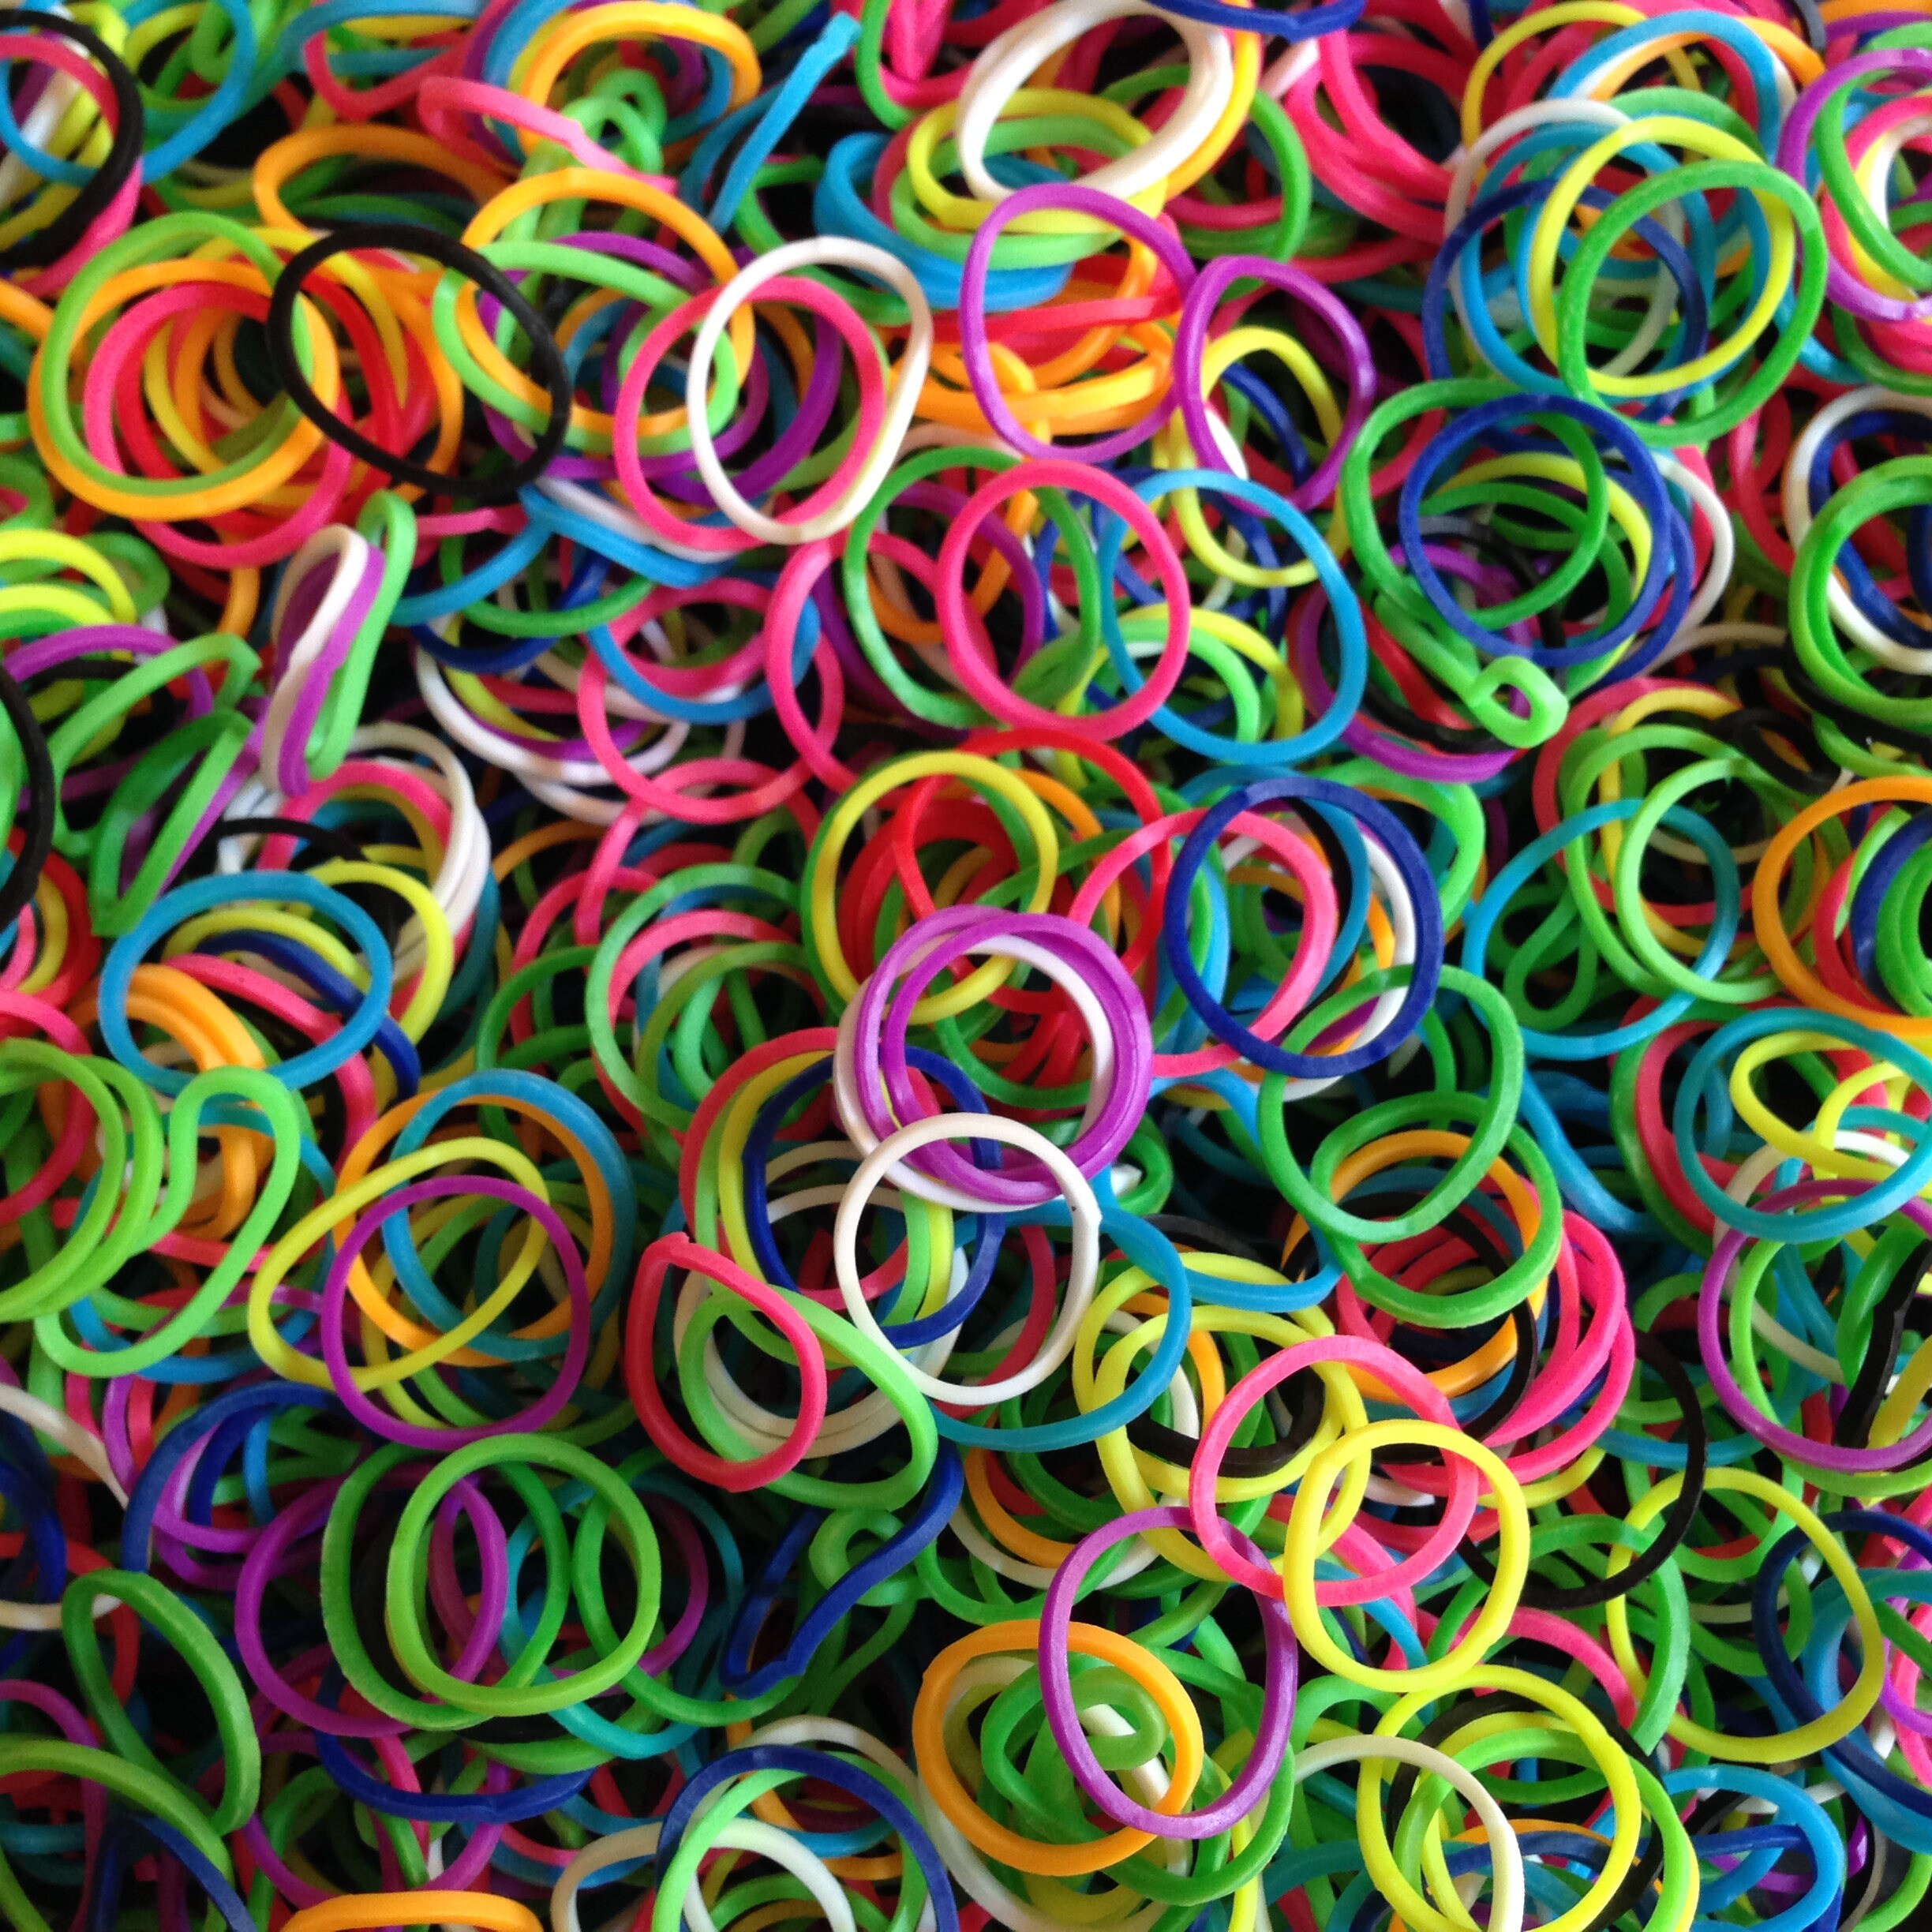 5200+ Rubber Bands Refill Loom Set: 8 Colors Glow in The Dark 5000 Loom  Bands,200 Colored S-Clips,10 Charms,1 Upgrade Crochet Hook for Kids DIY  Craft